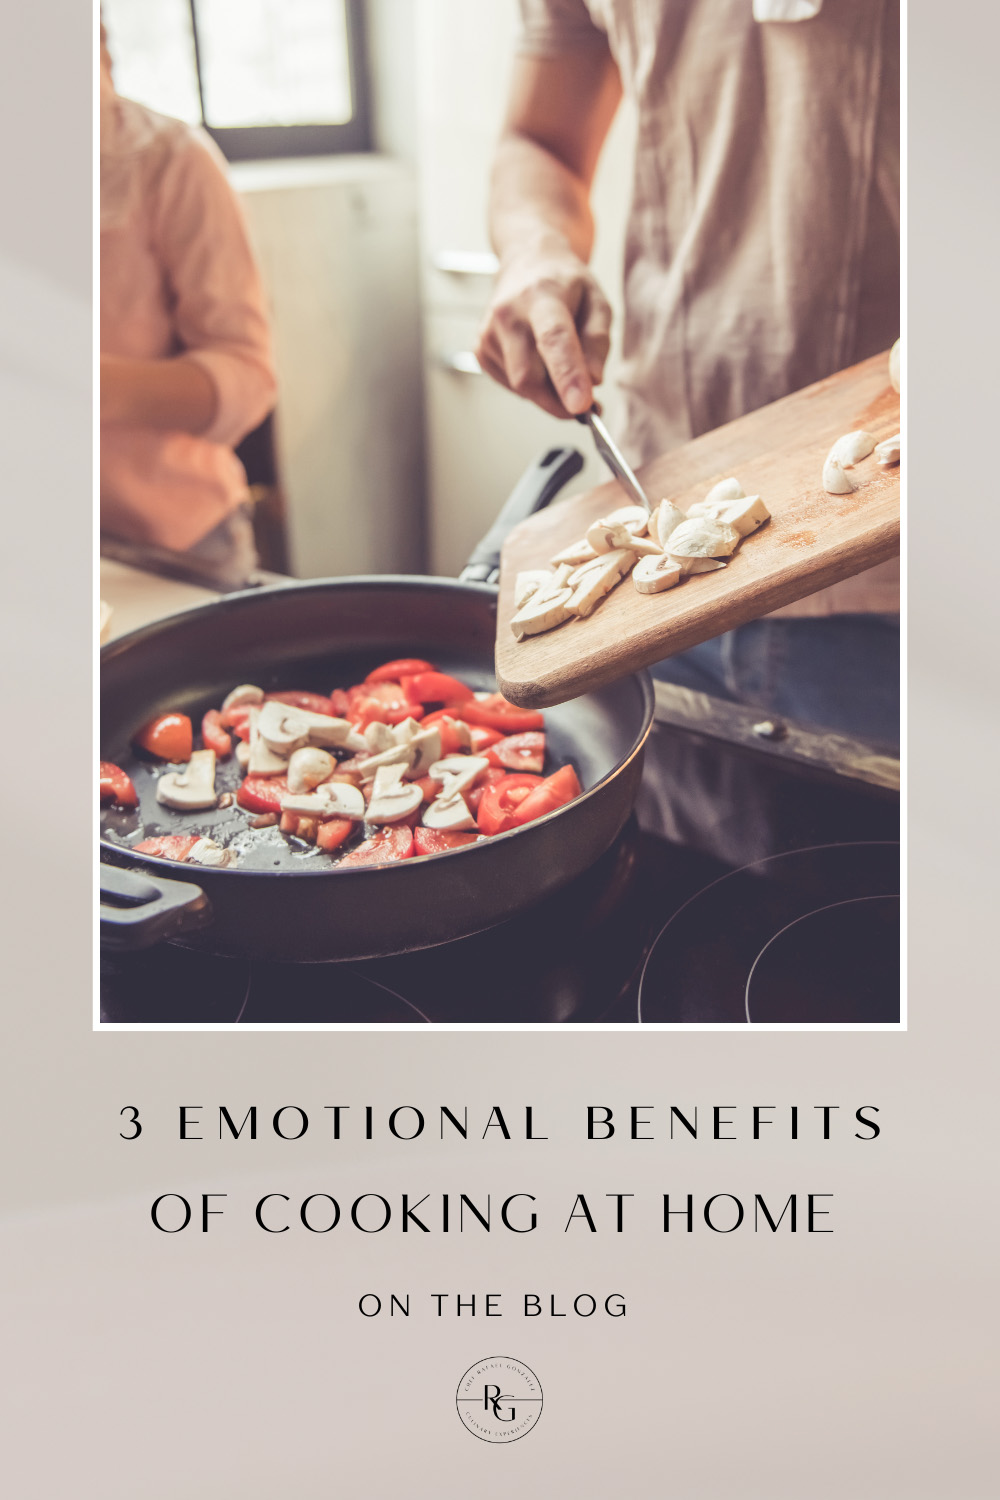 The emotional benefits of cooking at home